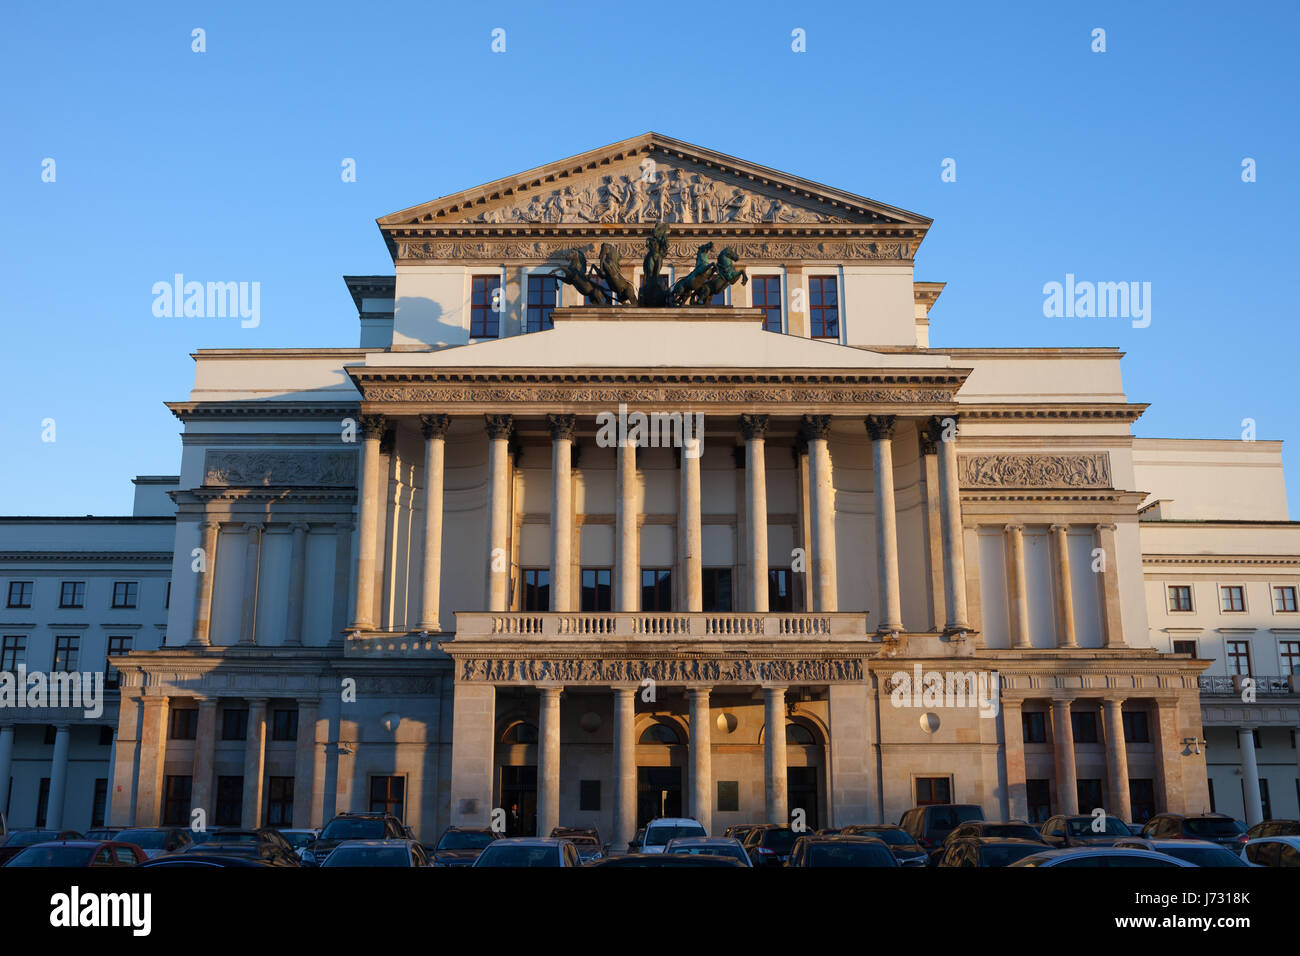 Poland, Warsaw, Grand Theatre and National Opera, city landmark, classical style architecture Stock Photo